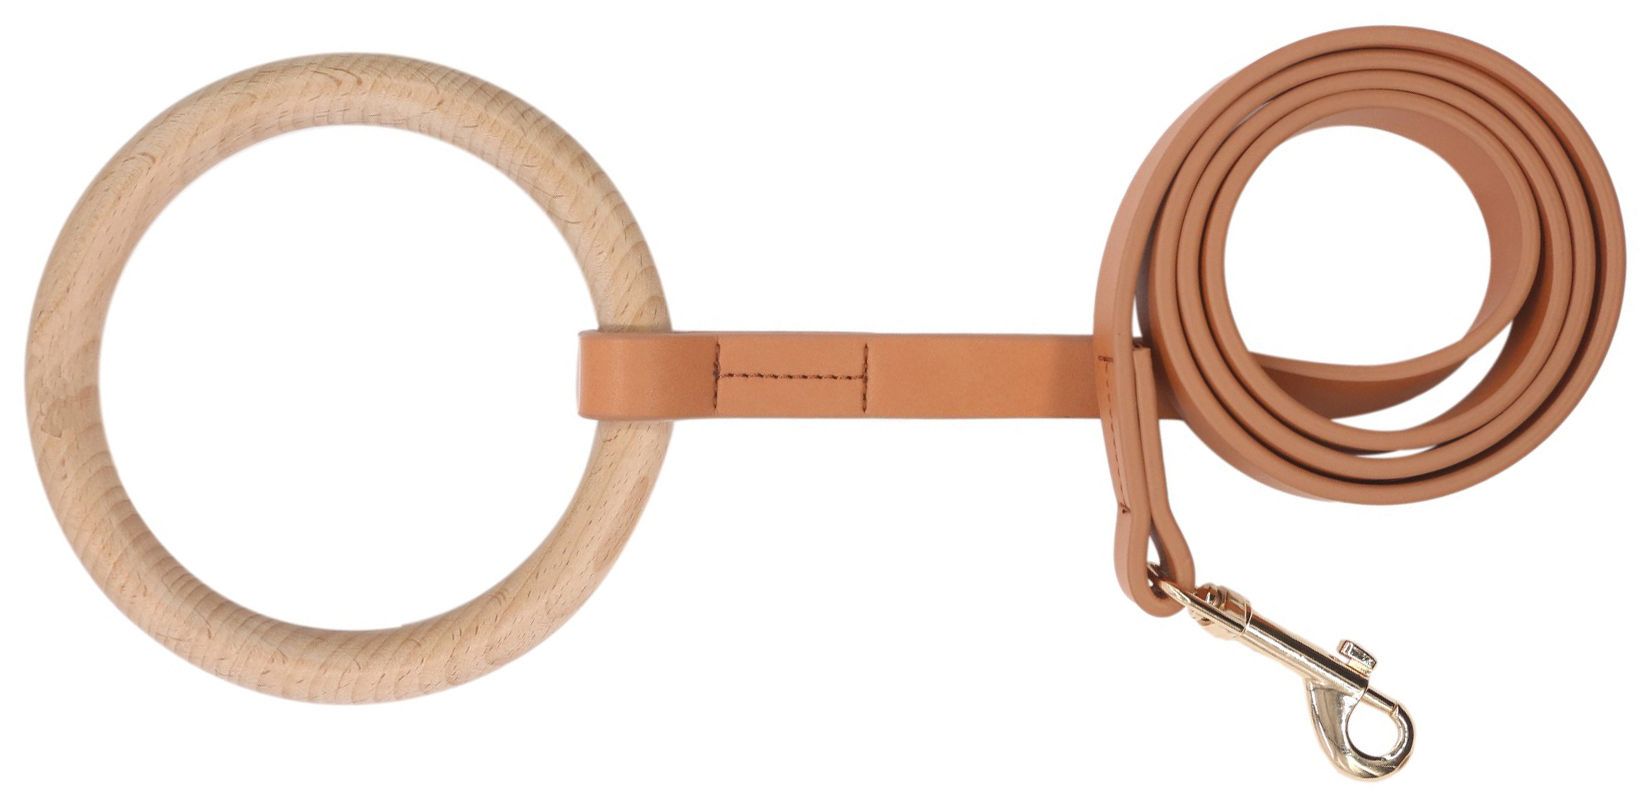 Pet Life ® 'Ever-Craft' Boutique Series Beechwood and Leather Designer Dog Leash Brown 